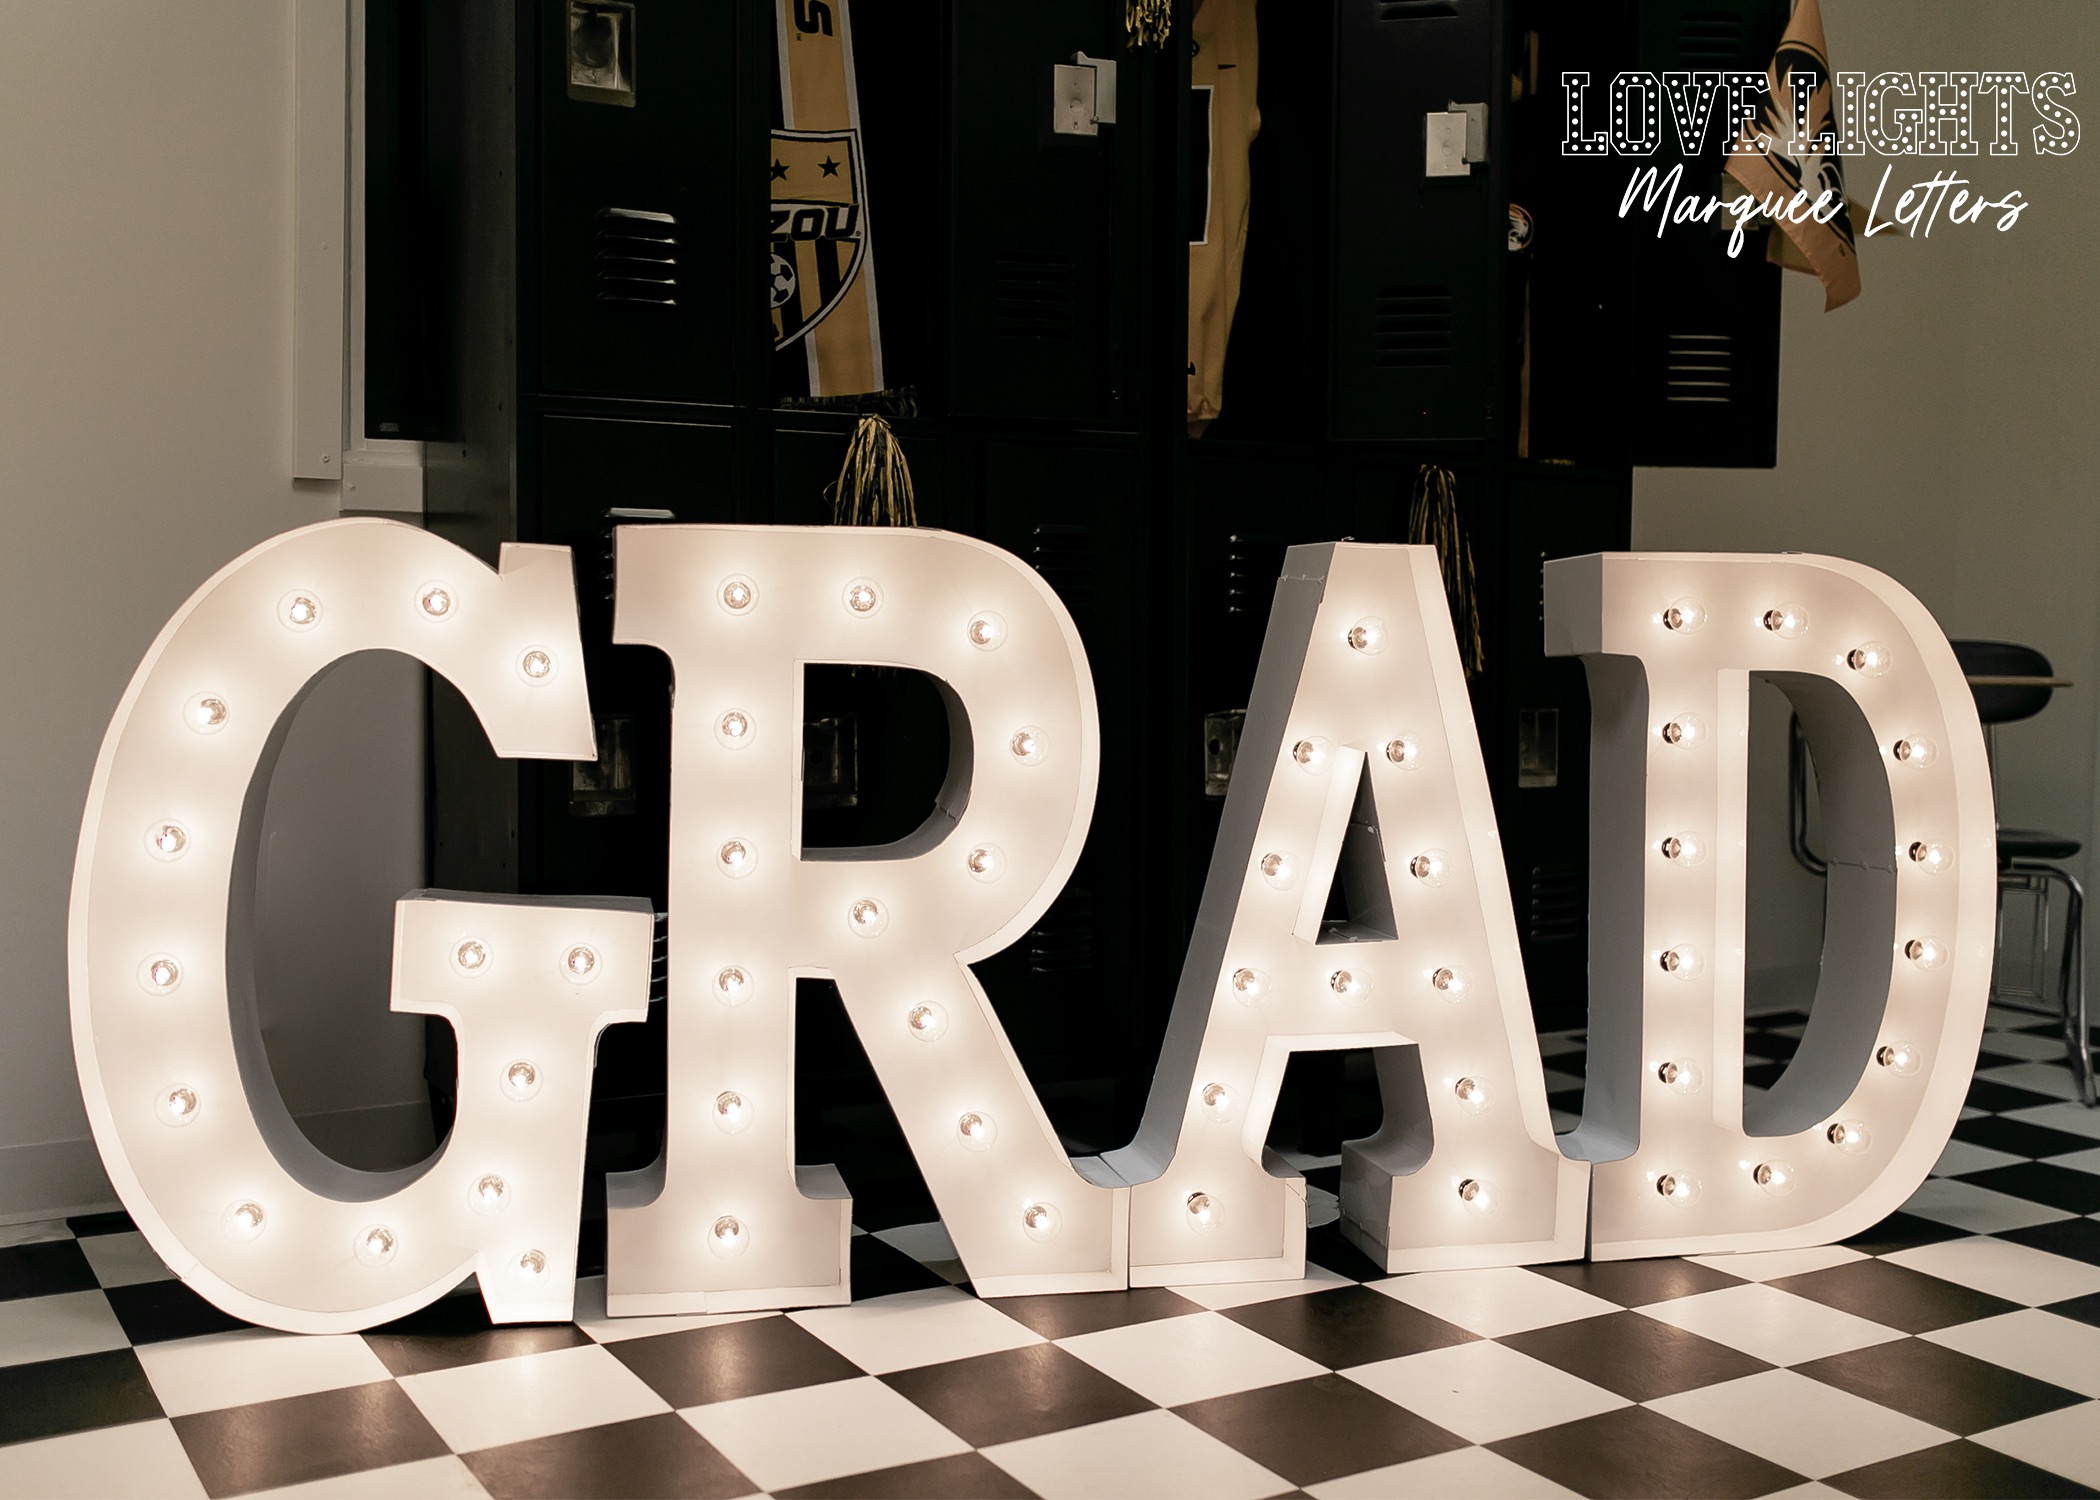 GRAD in lit marquee letters on checkered floor